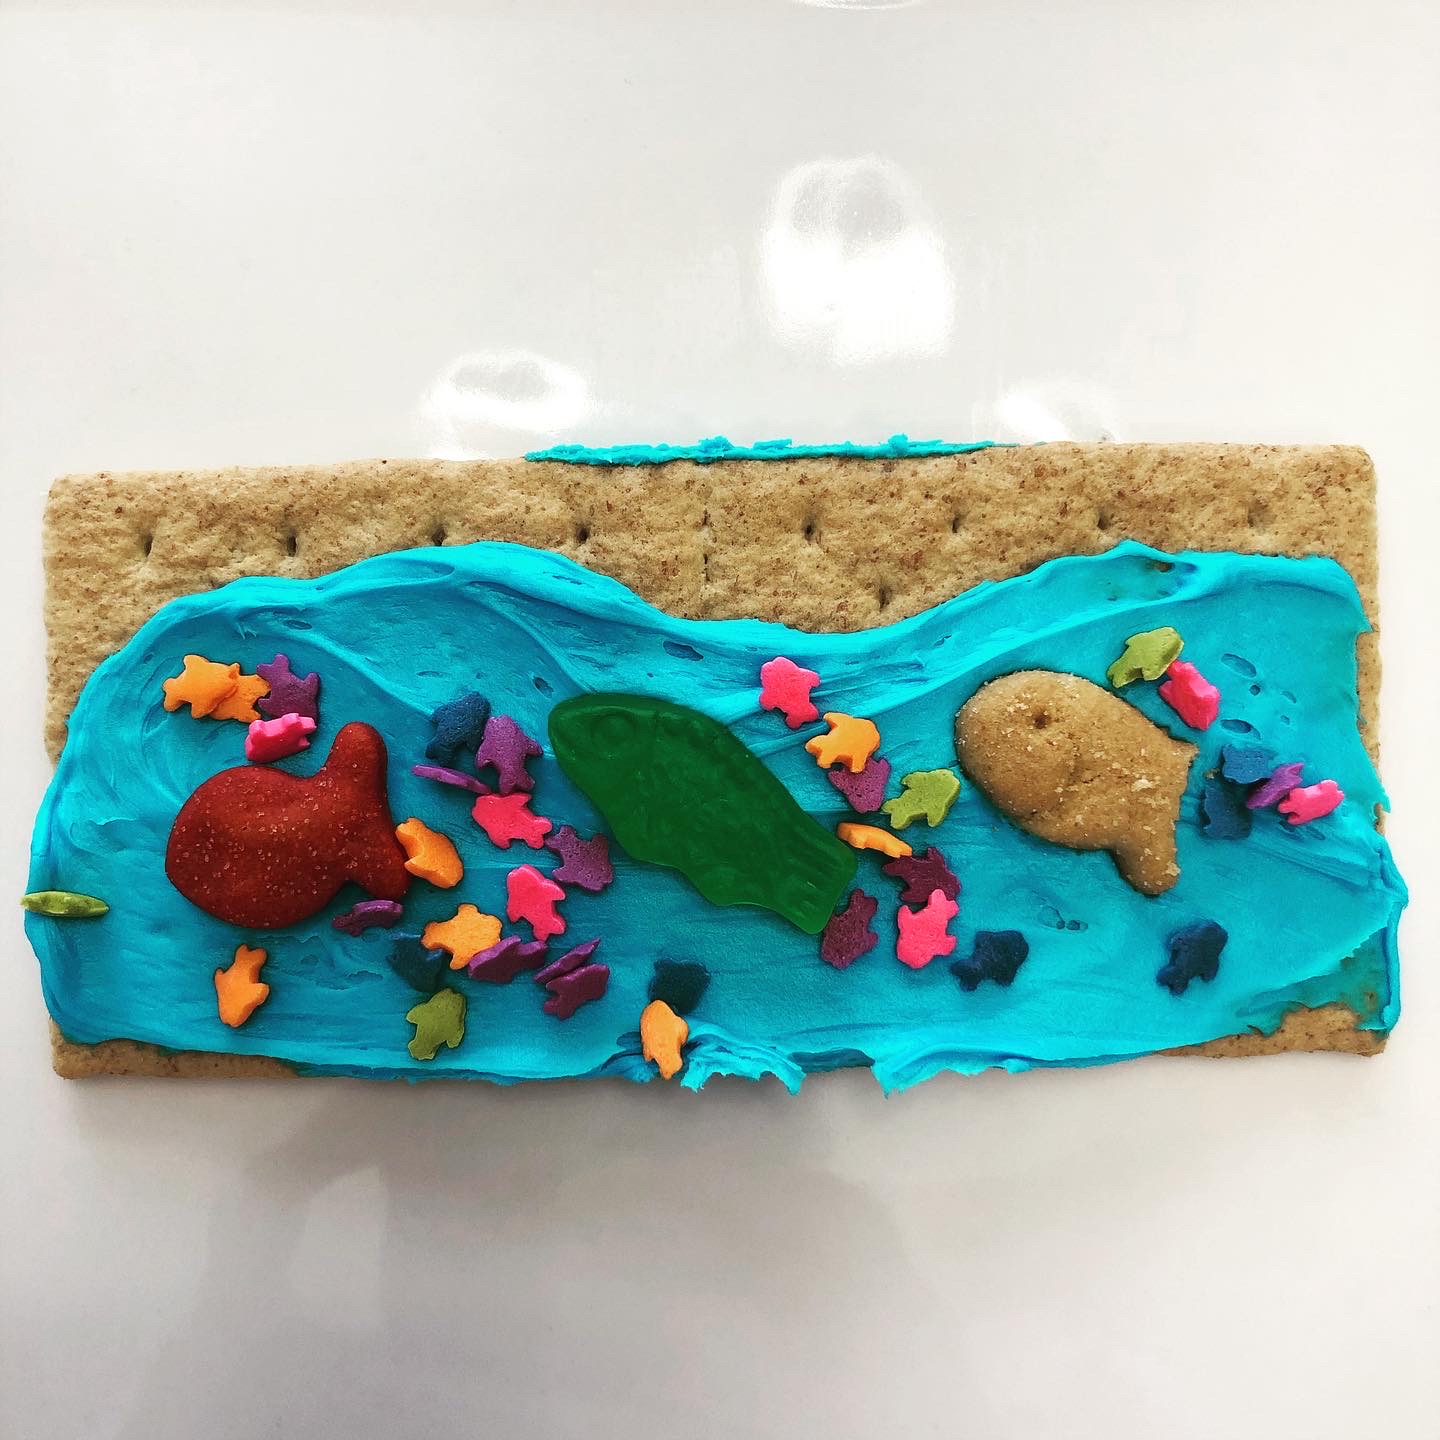 graham cracker covered with frosting and candy to look like an underwater scene